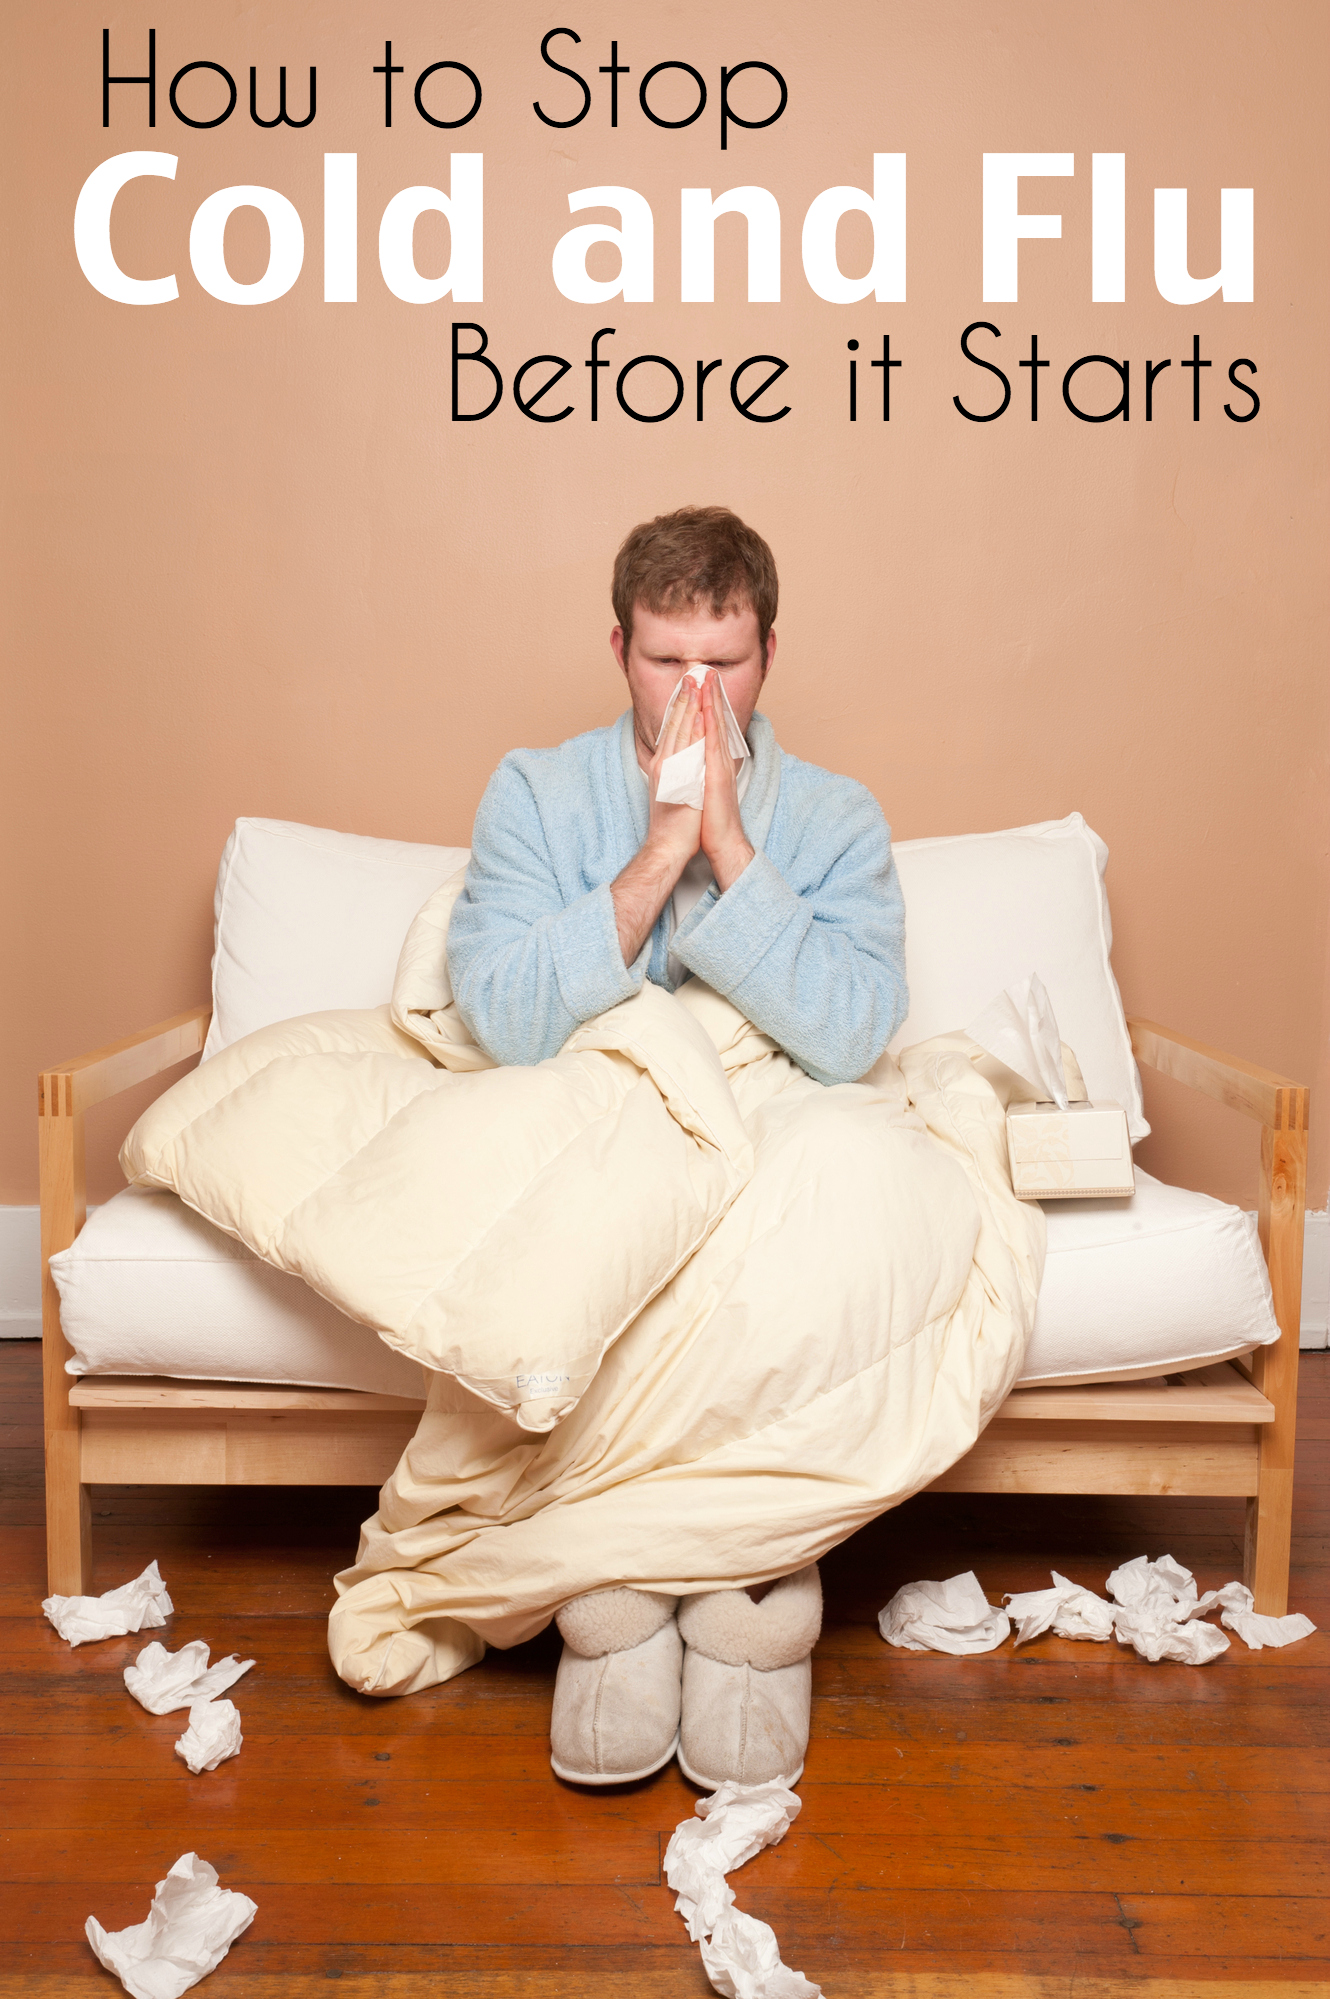 How to stop cold and flue before it starts, 7 preventative tips plus how to lessen duration